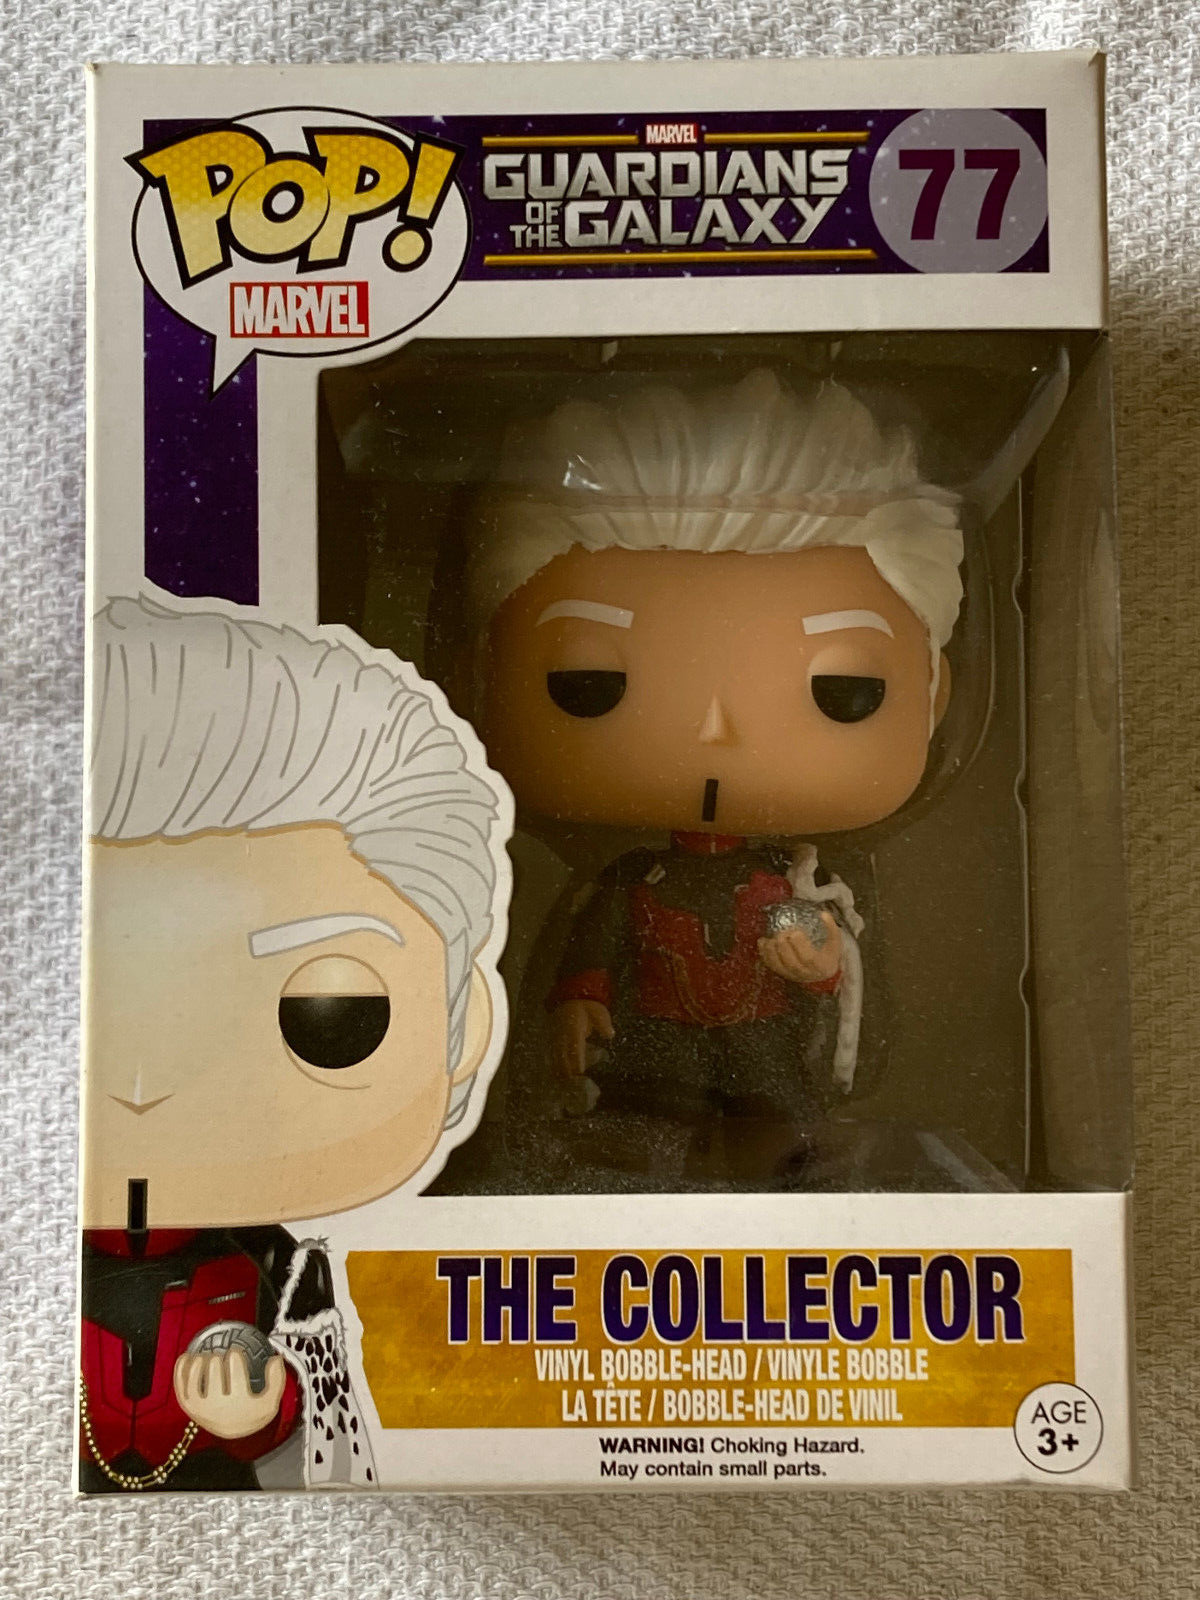 THE COLLECTOR #77 GUARDIANS OF THE GALAXY NIB Old Stock